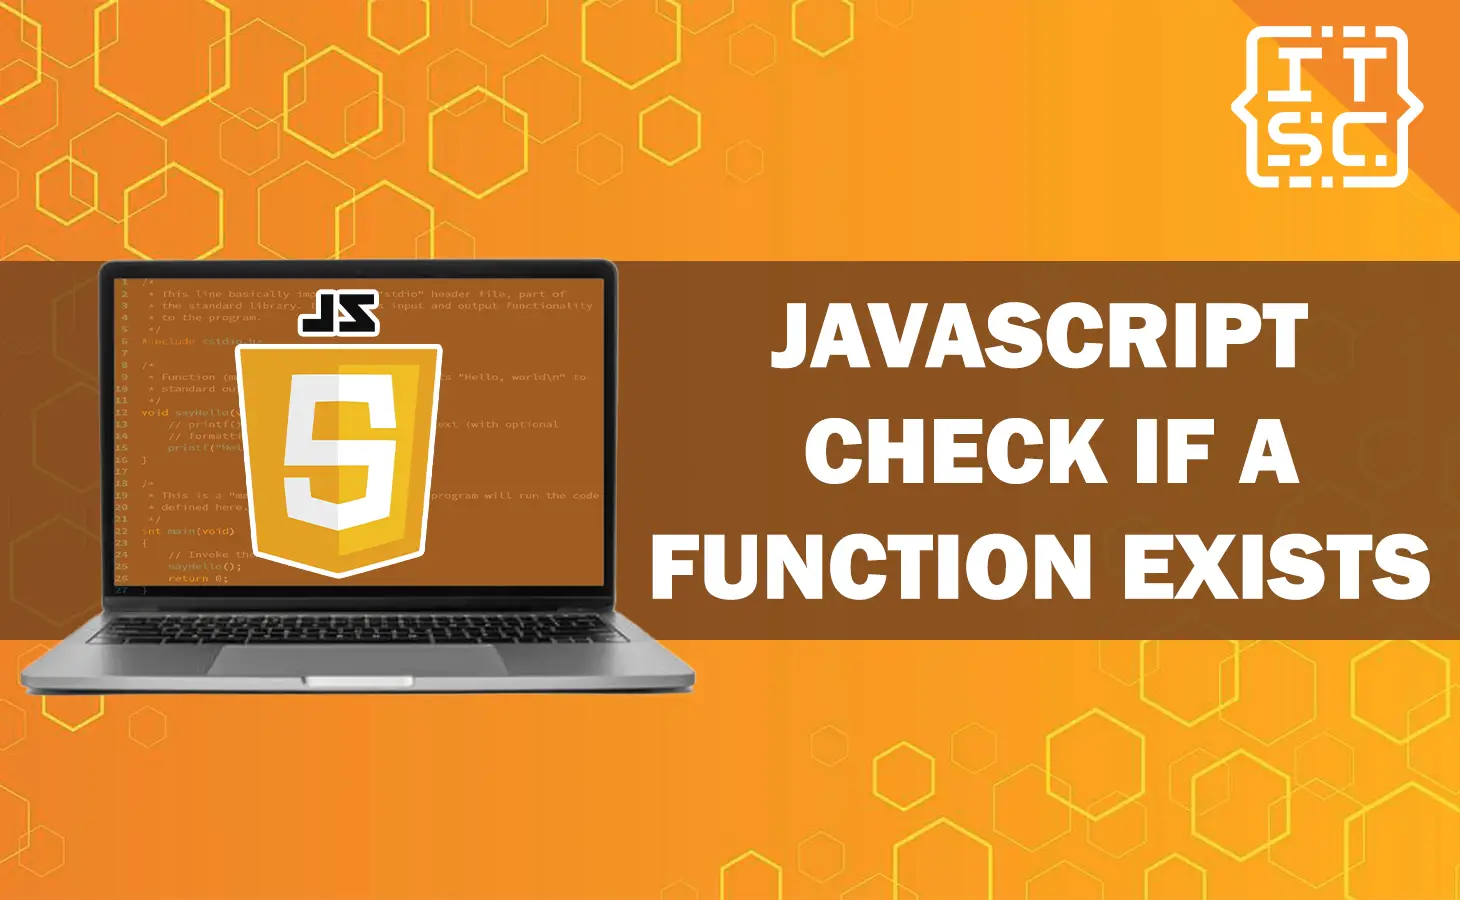 How to check if a function exists in JavaScript?